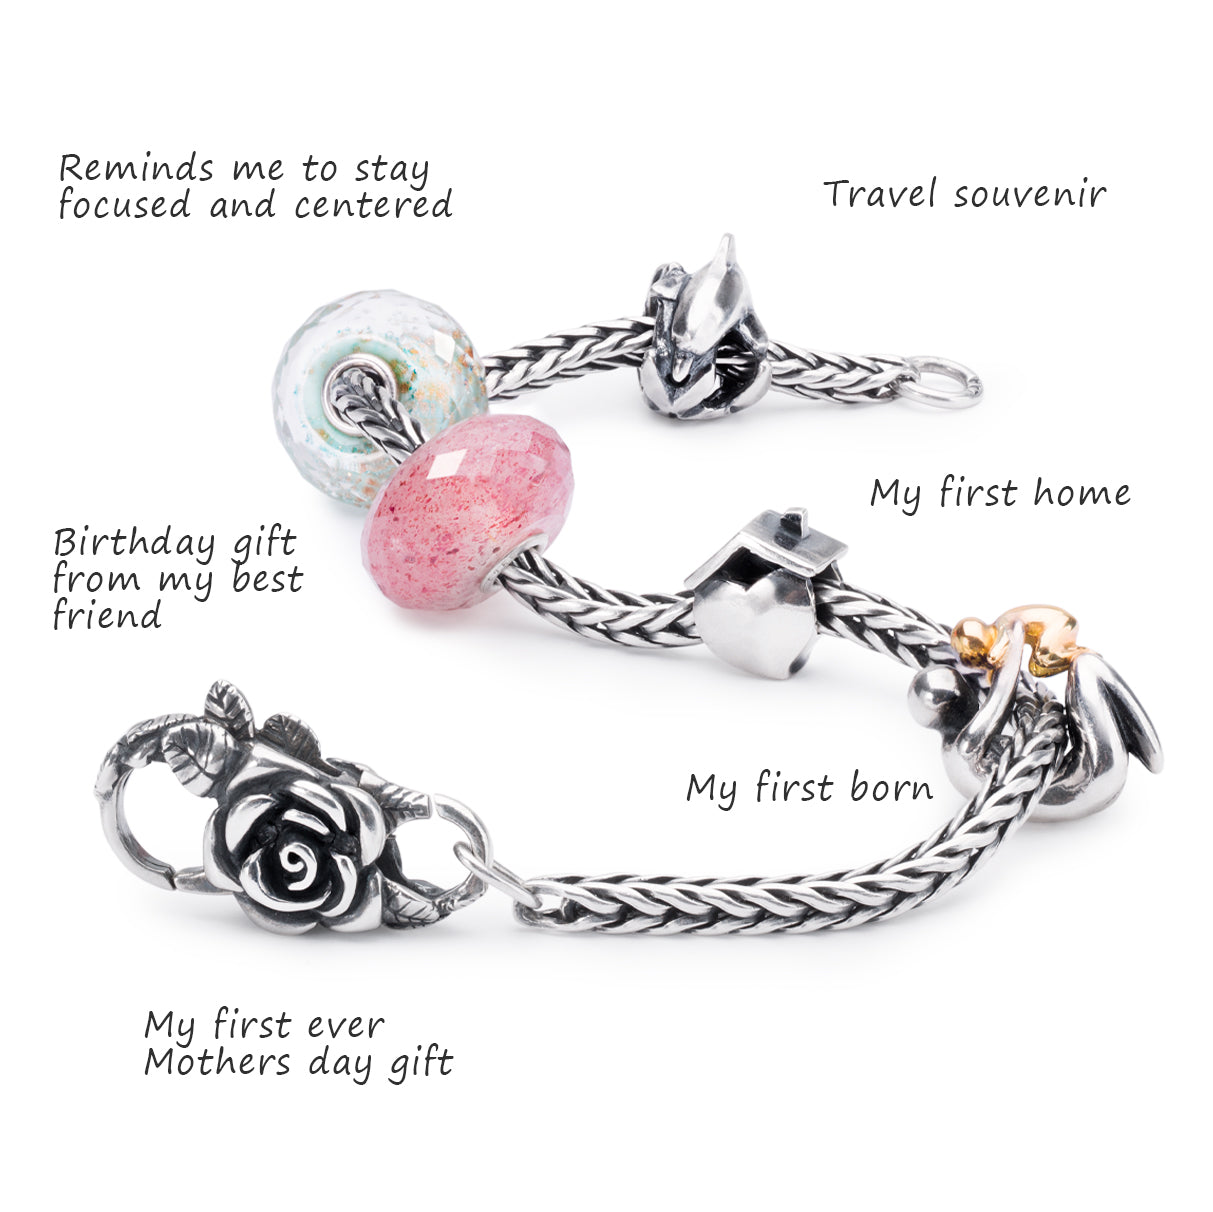 Trollbeads jewellery telling a story of firsts and life occasions